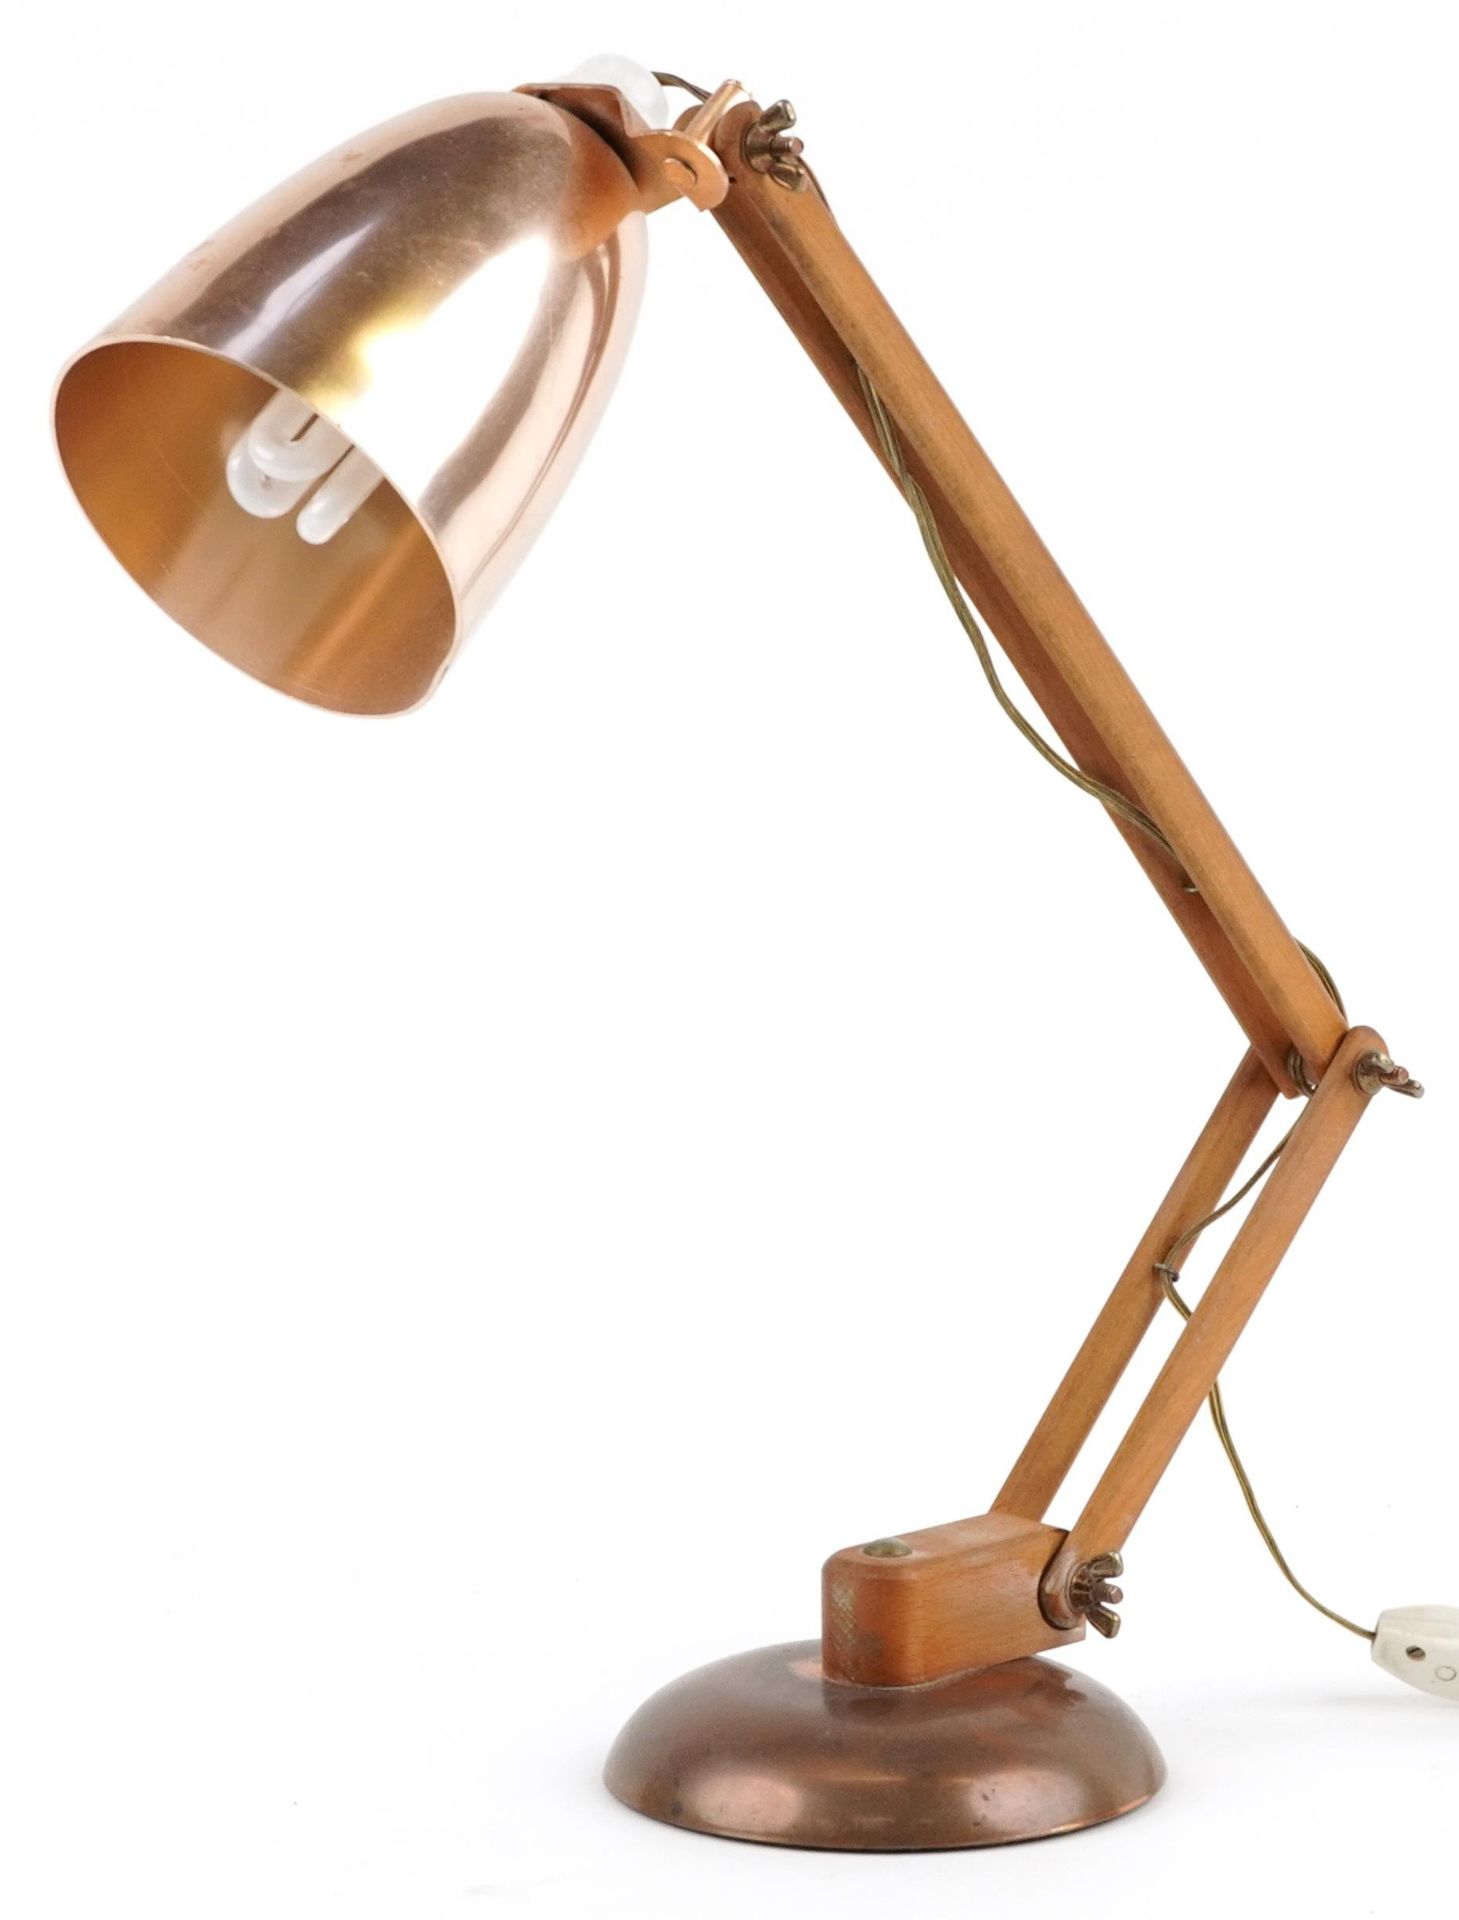 Vintage lightwood and coppered Anglepoise lamp : For further information on this lot please visit